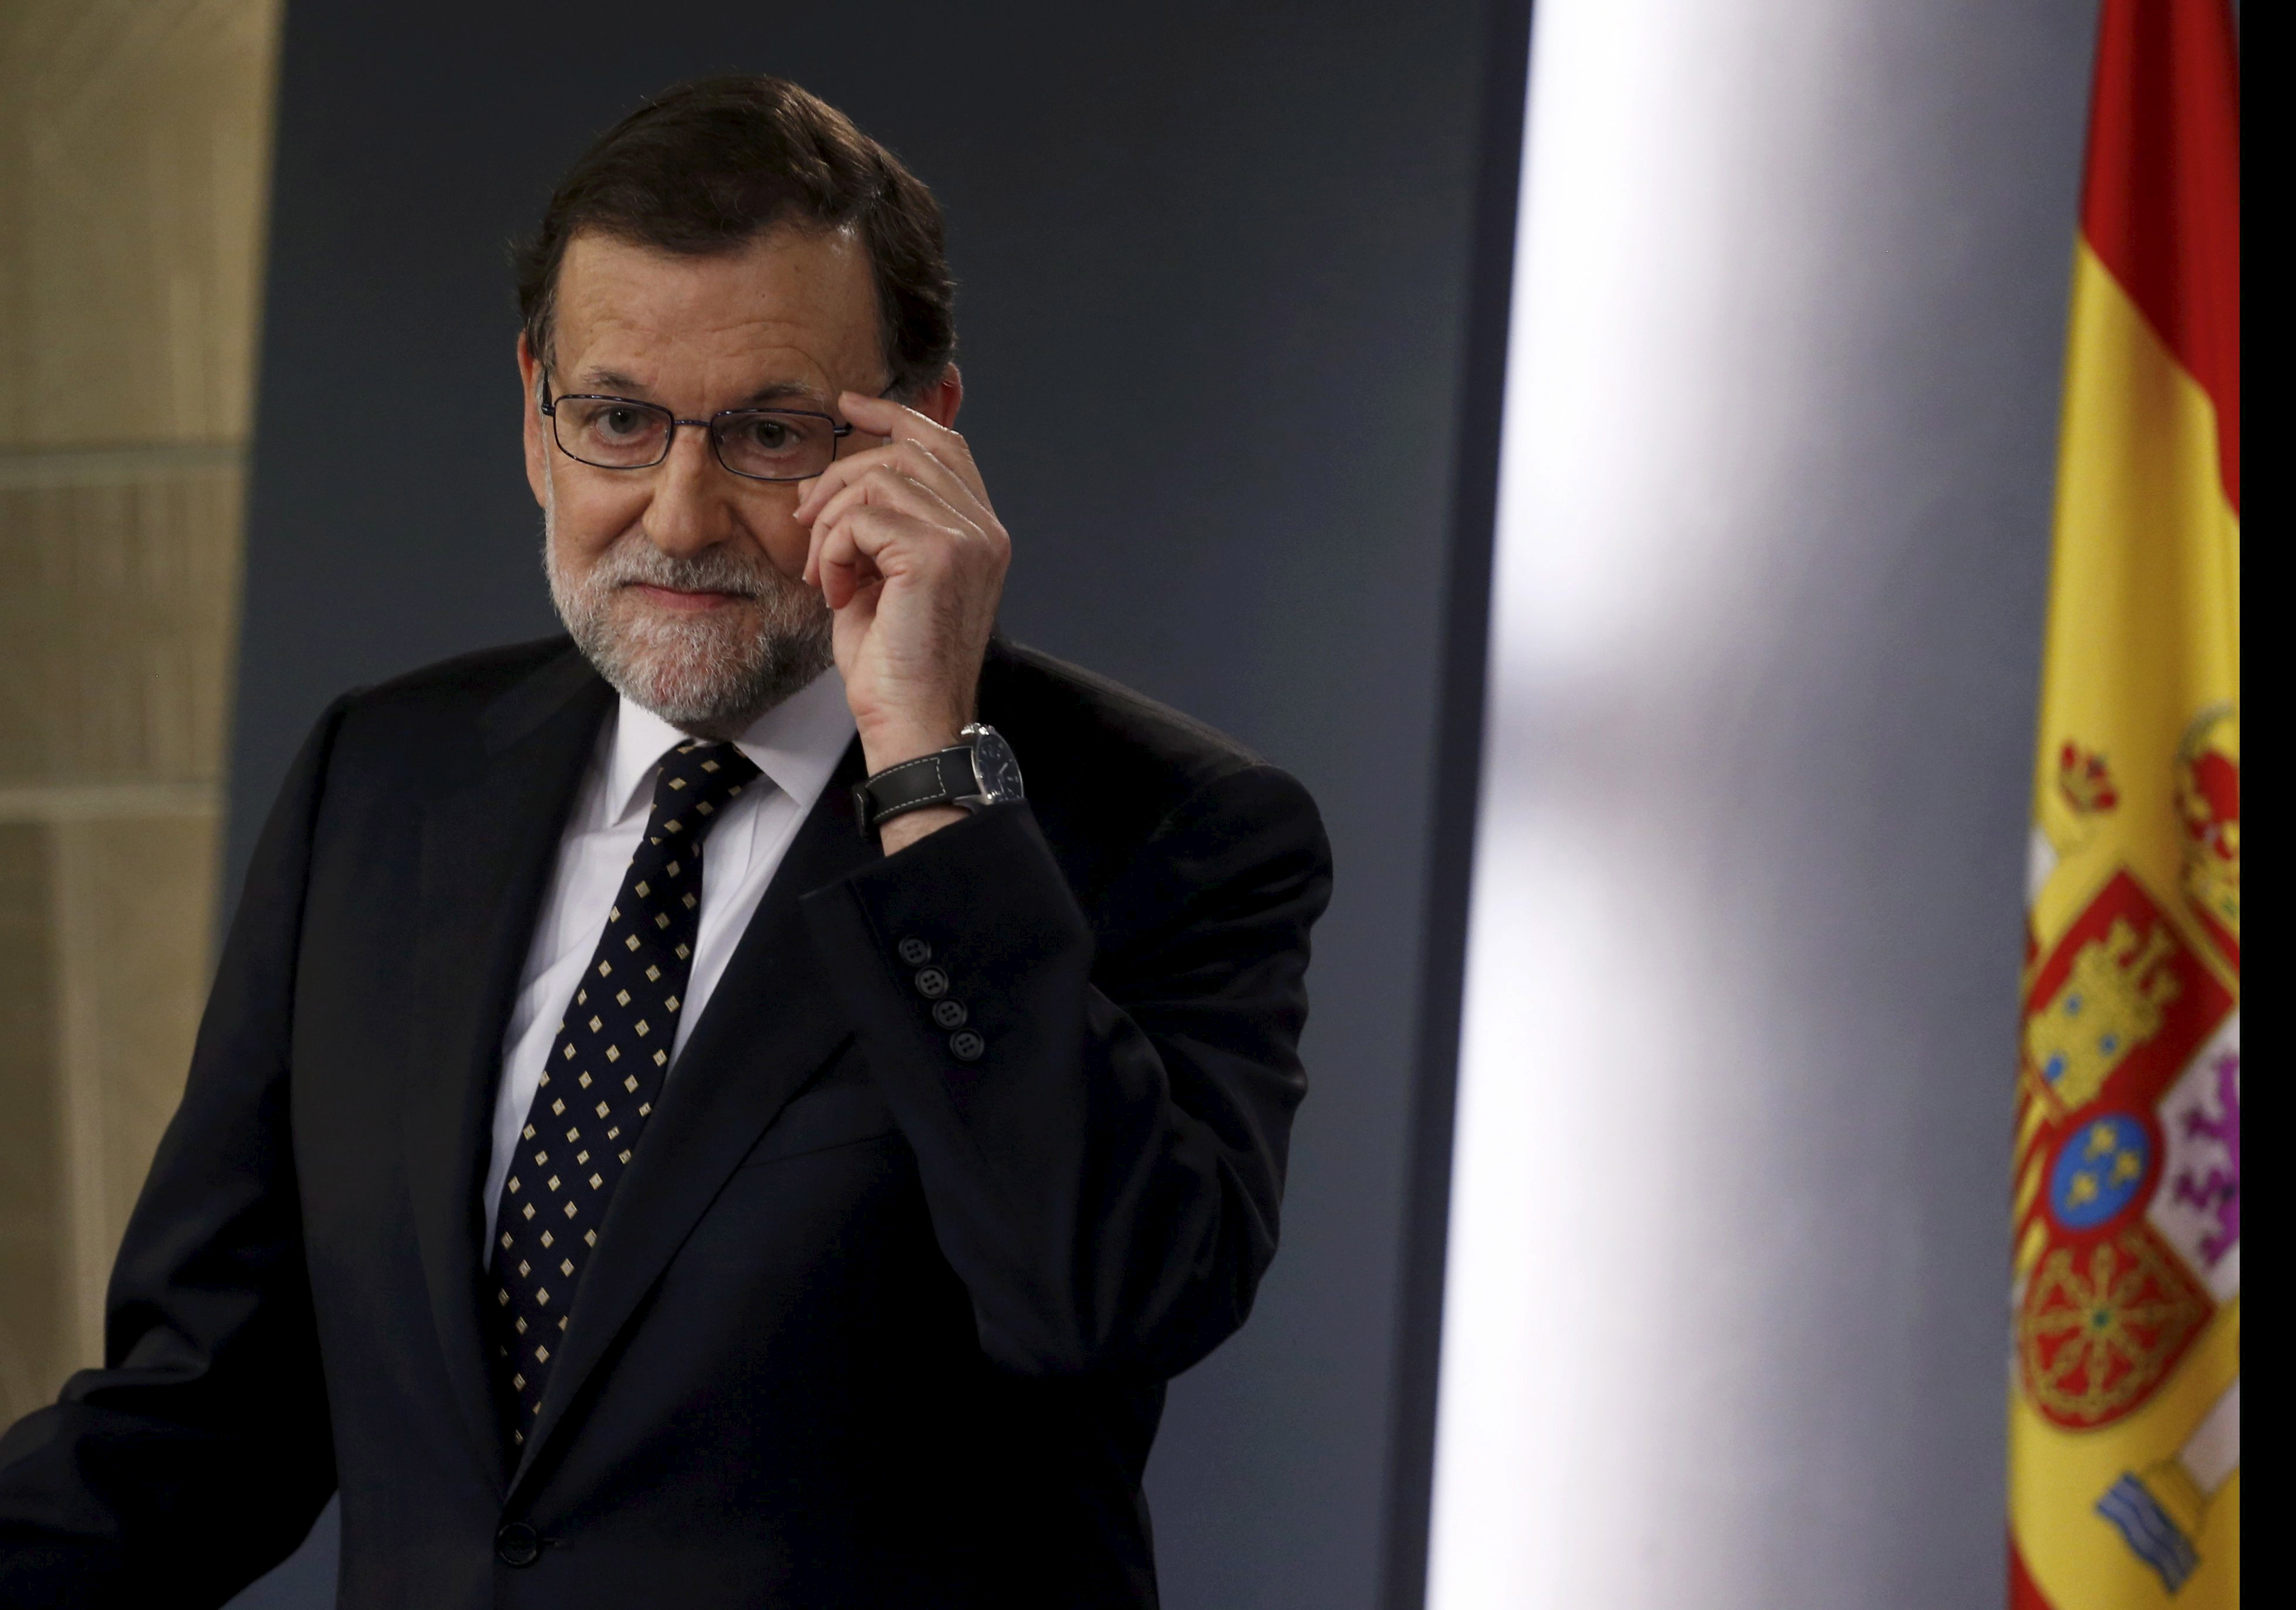 Spain's acting Prime Minister Mariano Rajoy attends a news conference at Moncloa Palace in Madrid, Spain, January 22, 2016.  REUTERS/Juan Medina - RTX23LI5